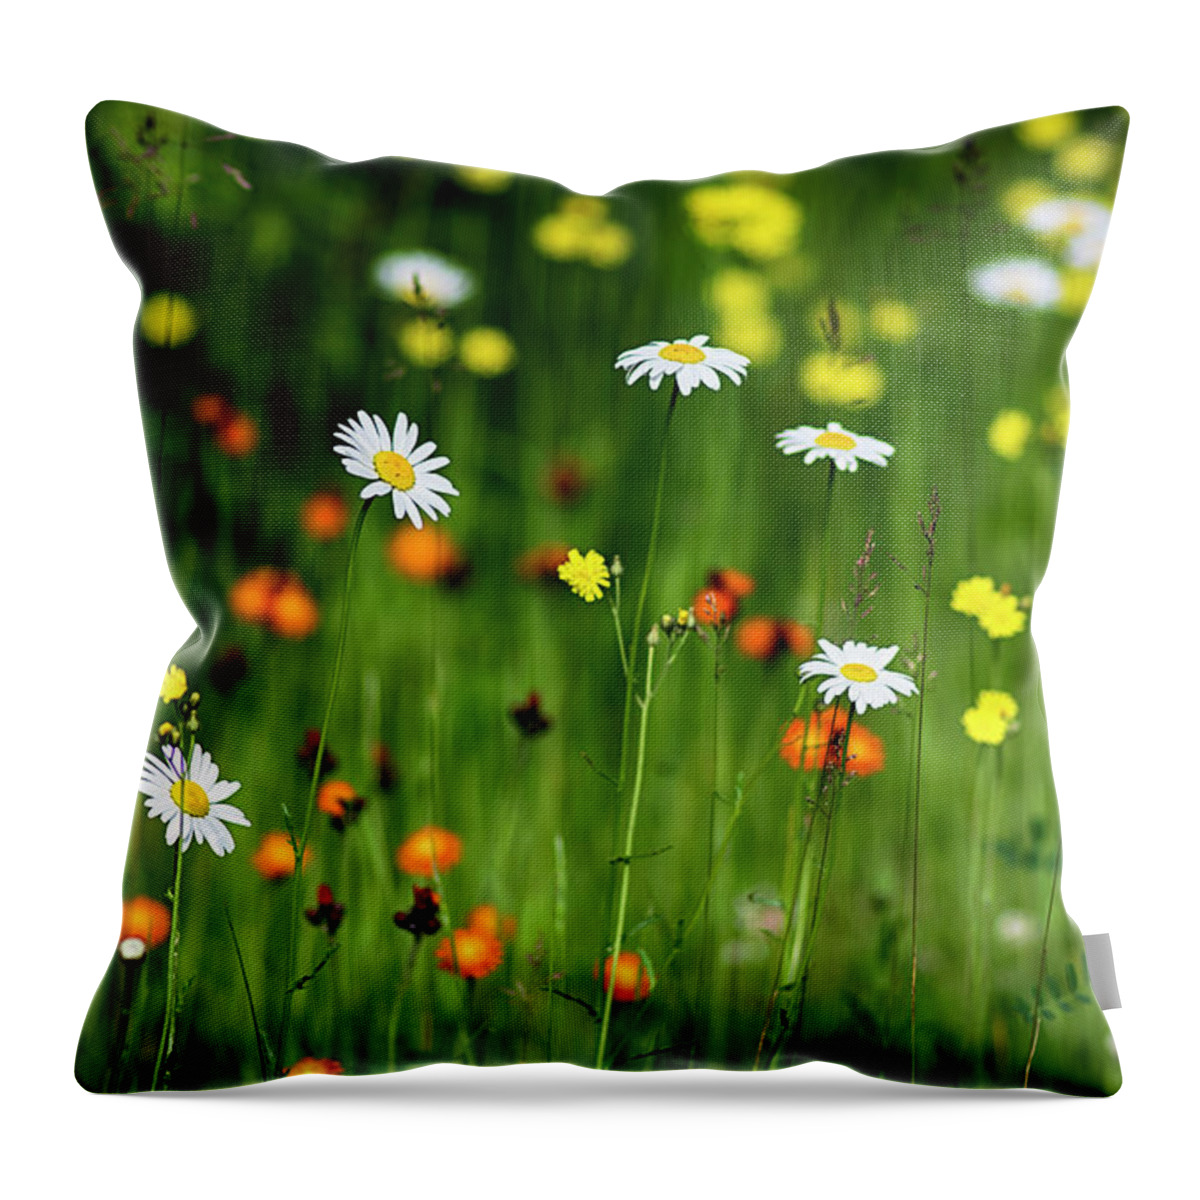  Throw Pillow featuring the photograph Wildflowers2 by Dan Hefle